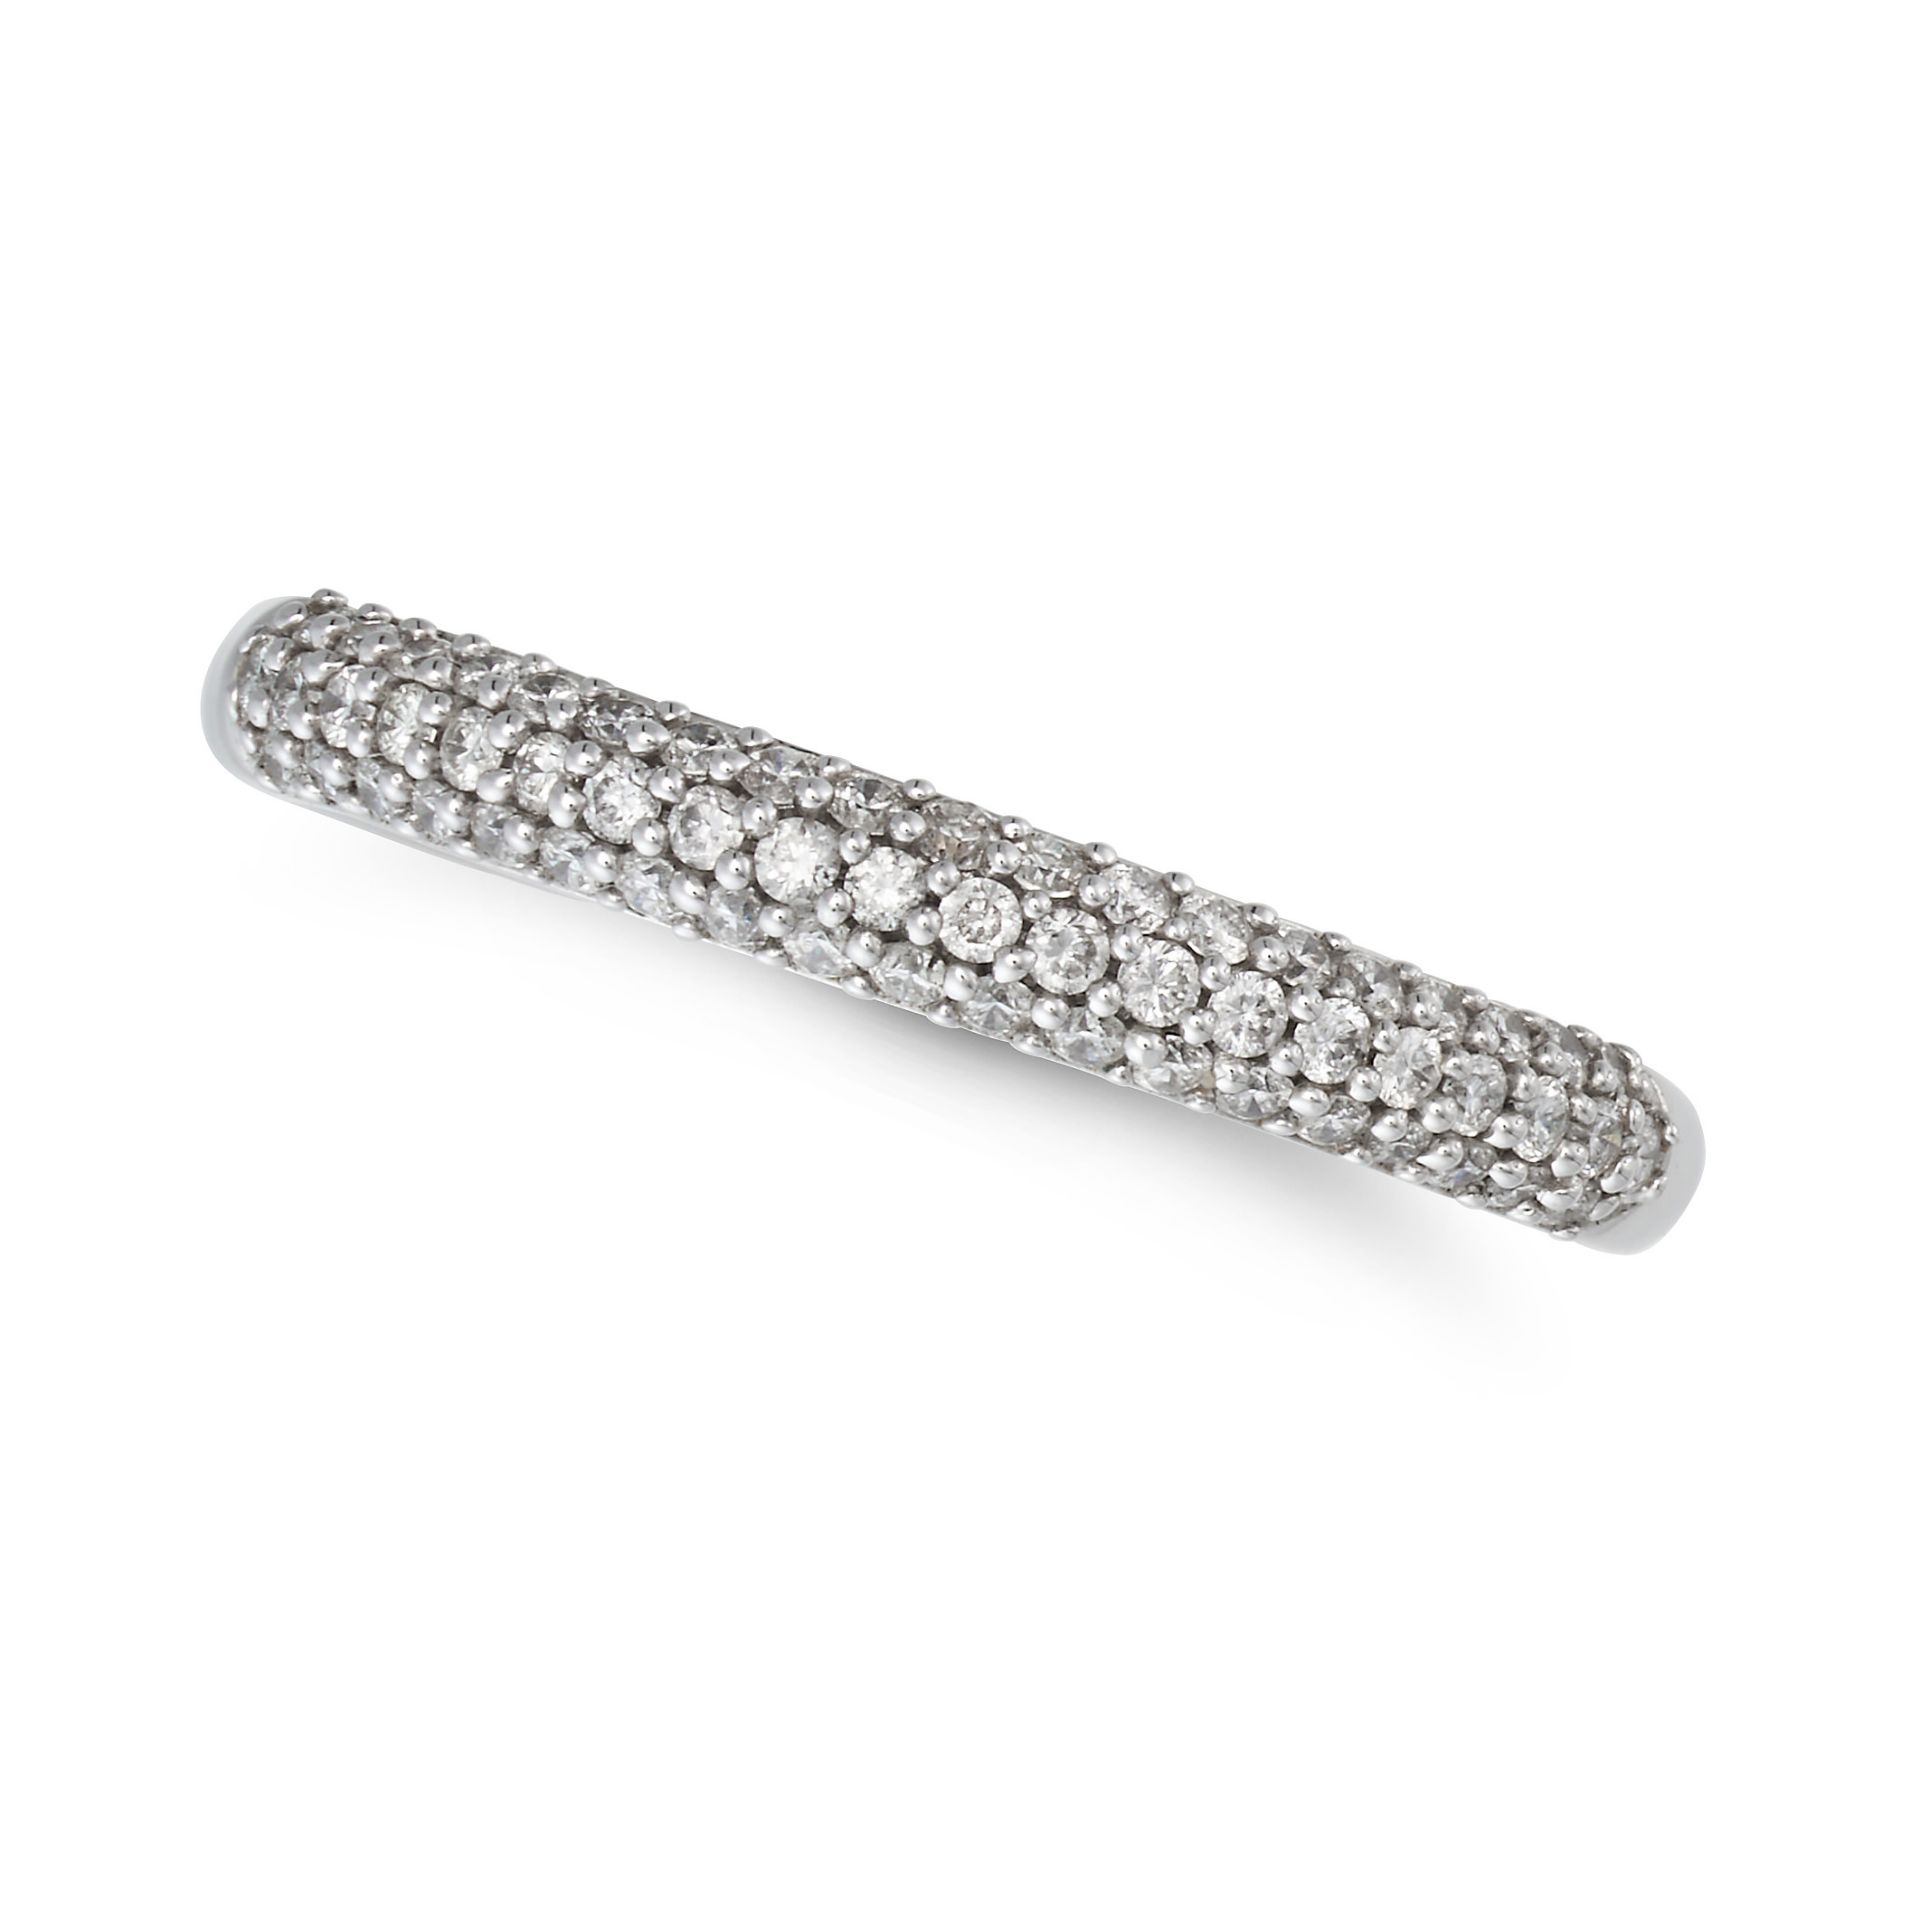 NO RESERVE - A DIAMOND RING in 18ct white gold, half set with three rows of round cut diamonds, i...